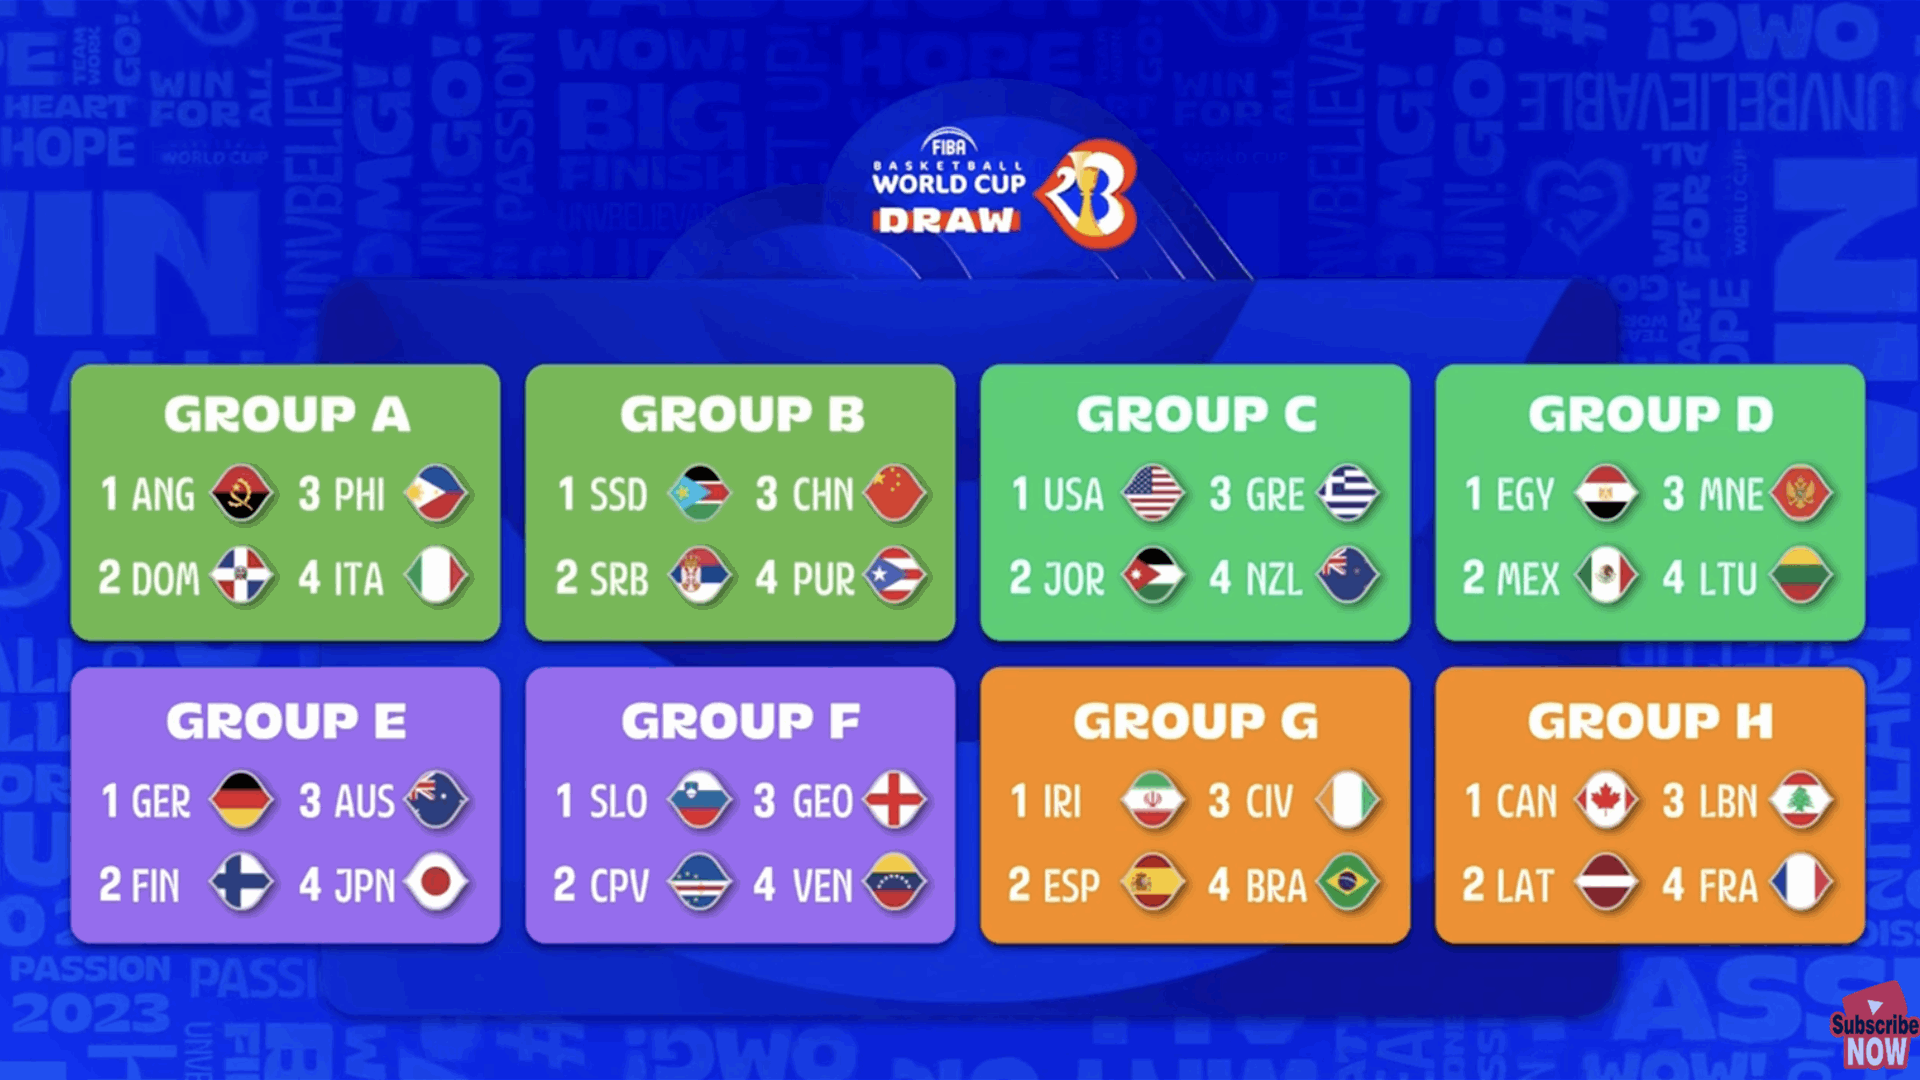 FIBA World Cup 2023 Draw Lebanon Joins Canada, France, and Latvia in Group H